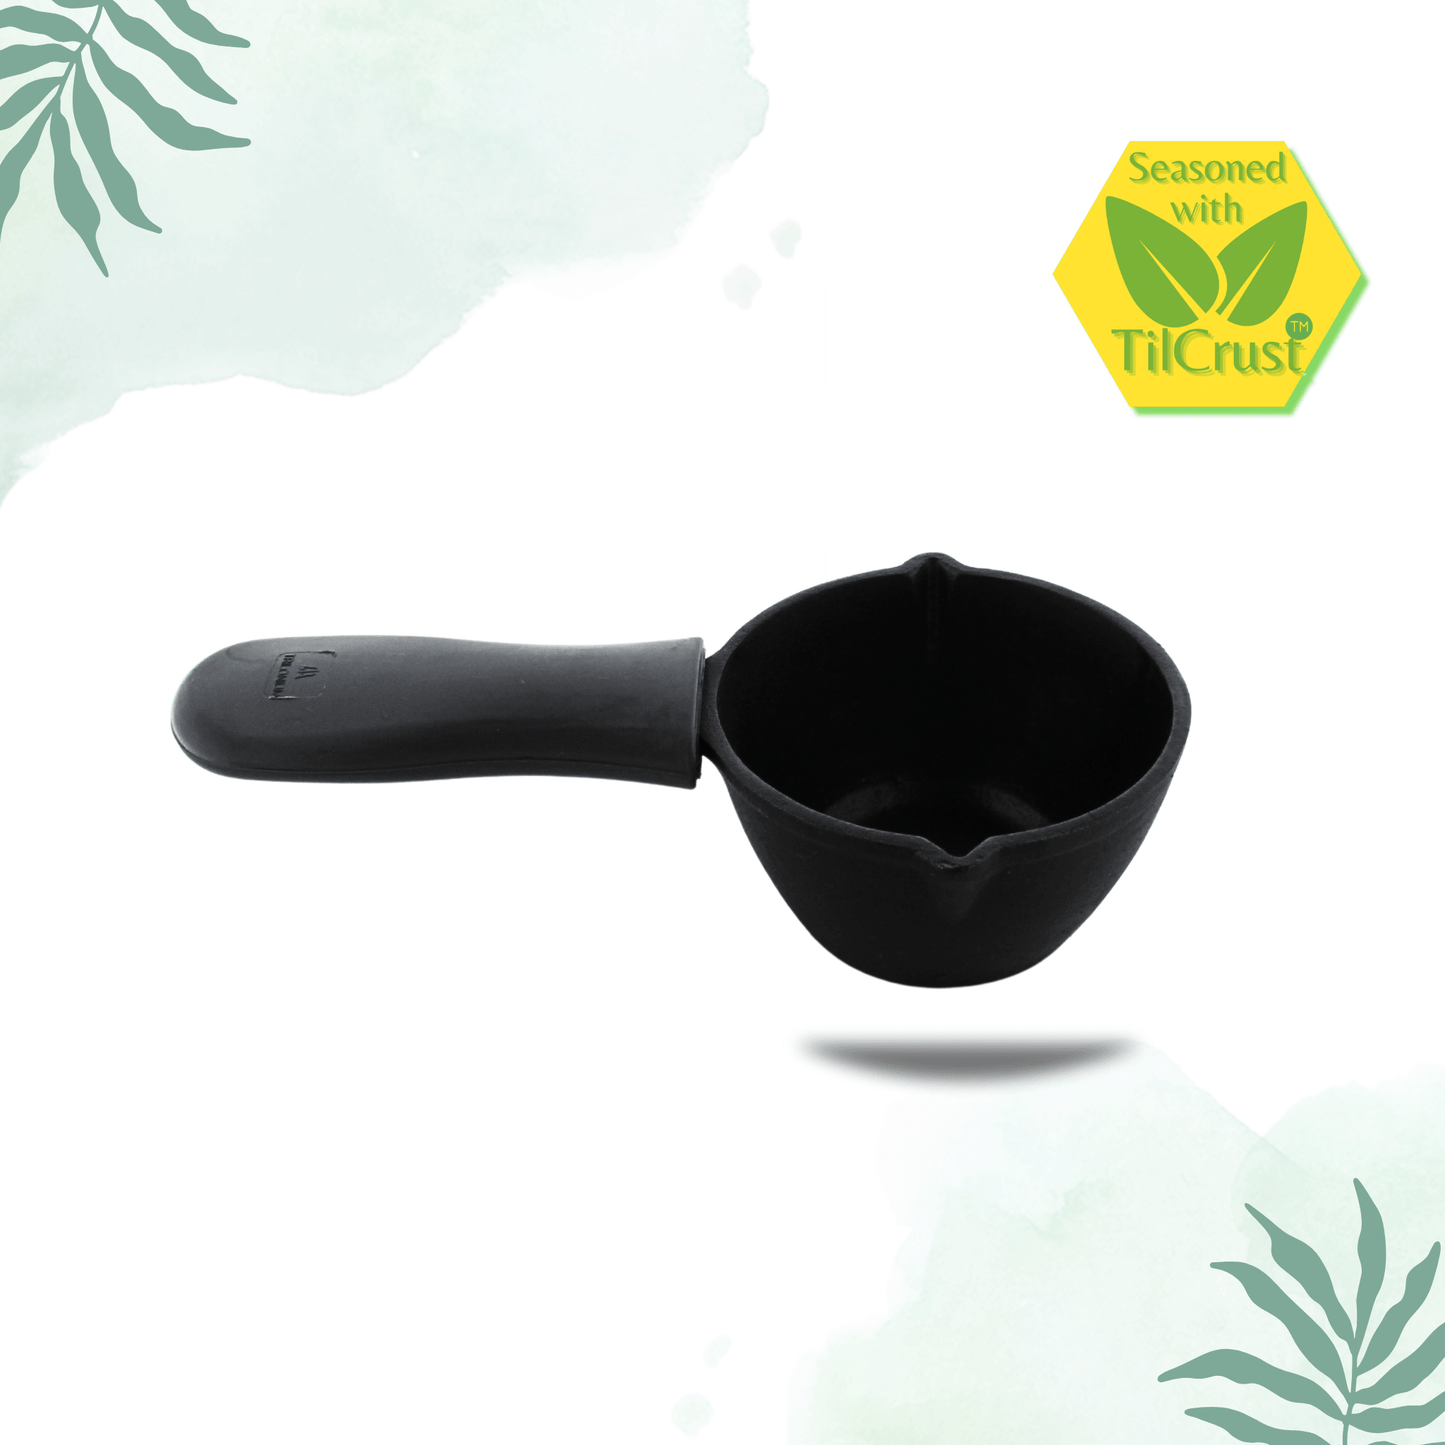 Trilonium Triple Seasoned Cast Iron Tadka Pan 11 cms with Hot handle silicone sleeve, weighs 0.8 kgs